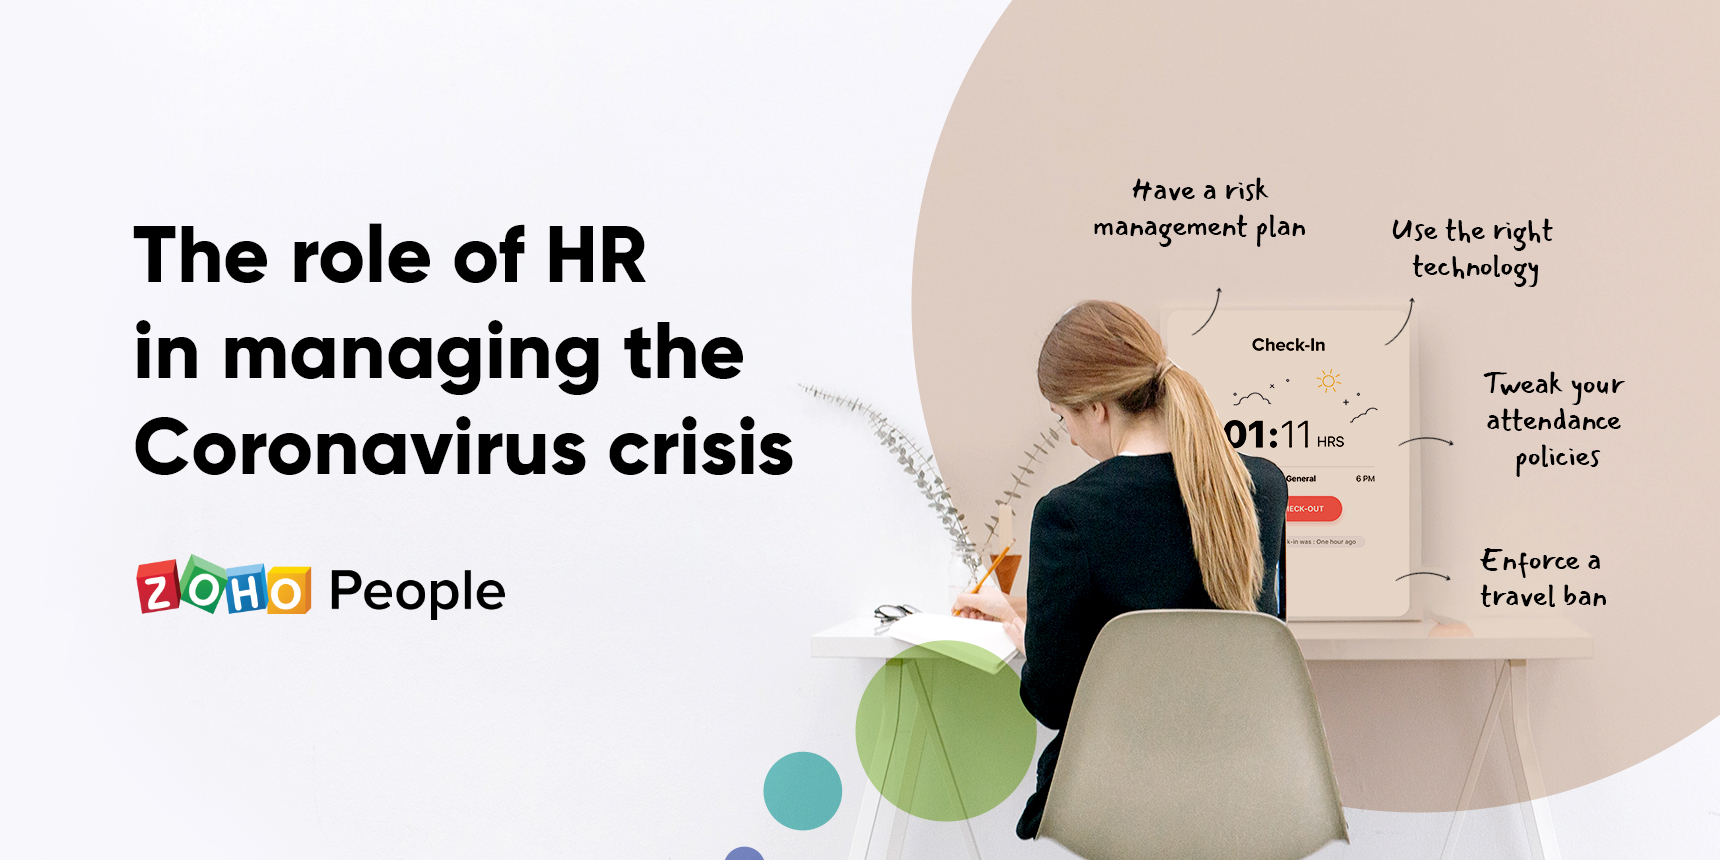 Managing employees during a crisis